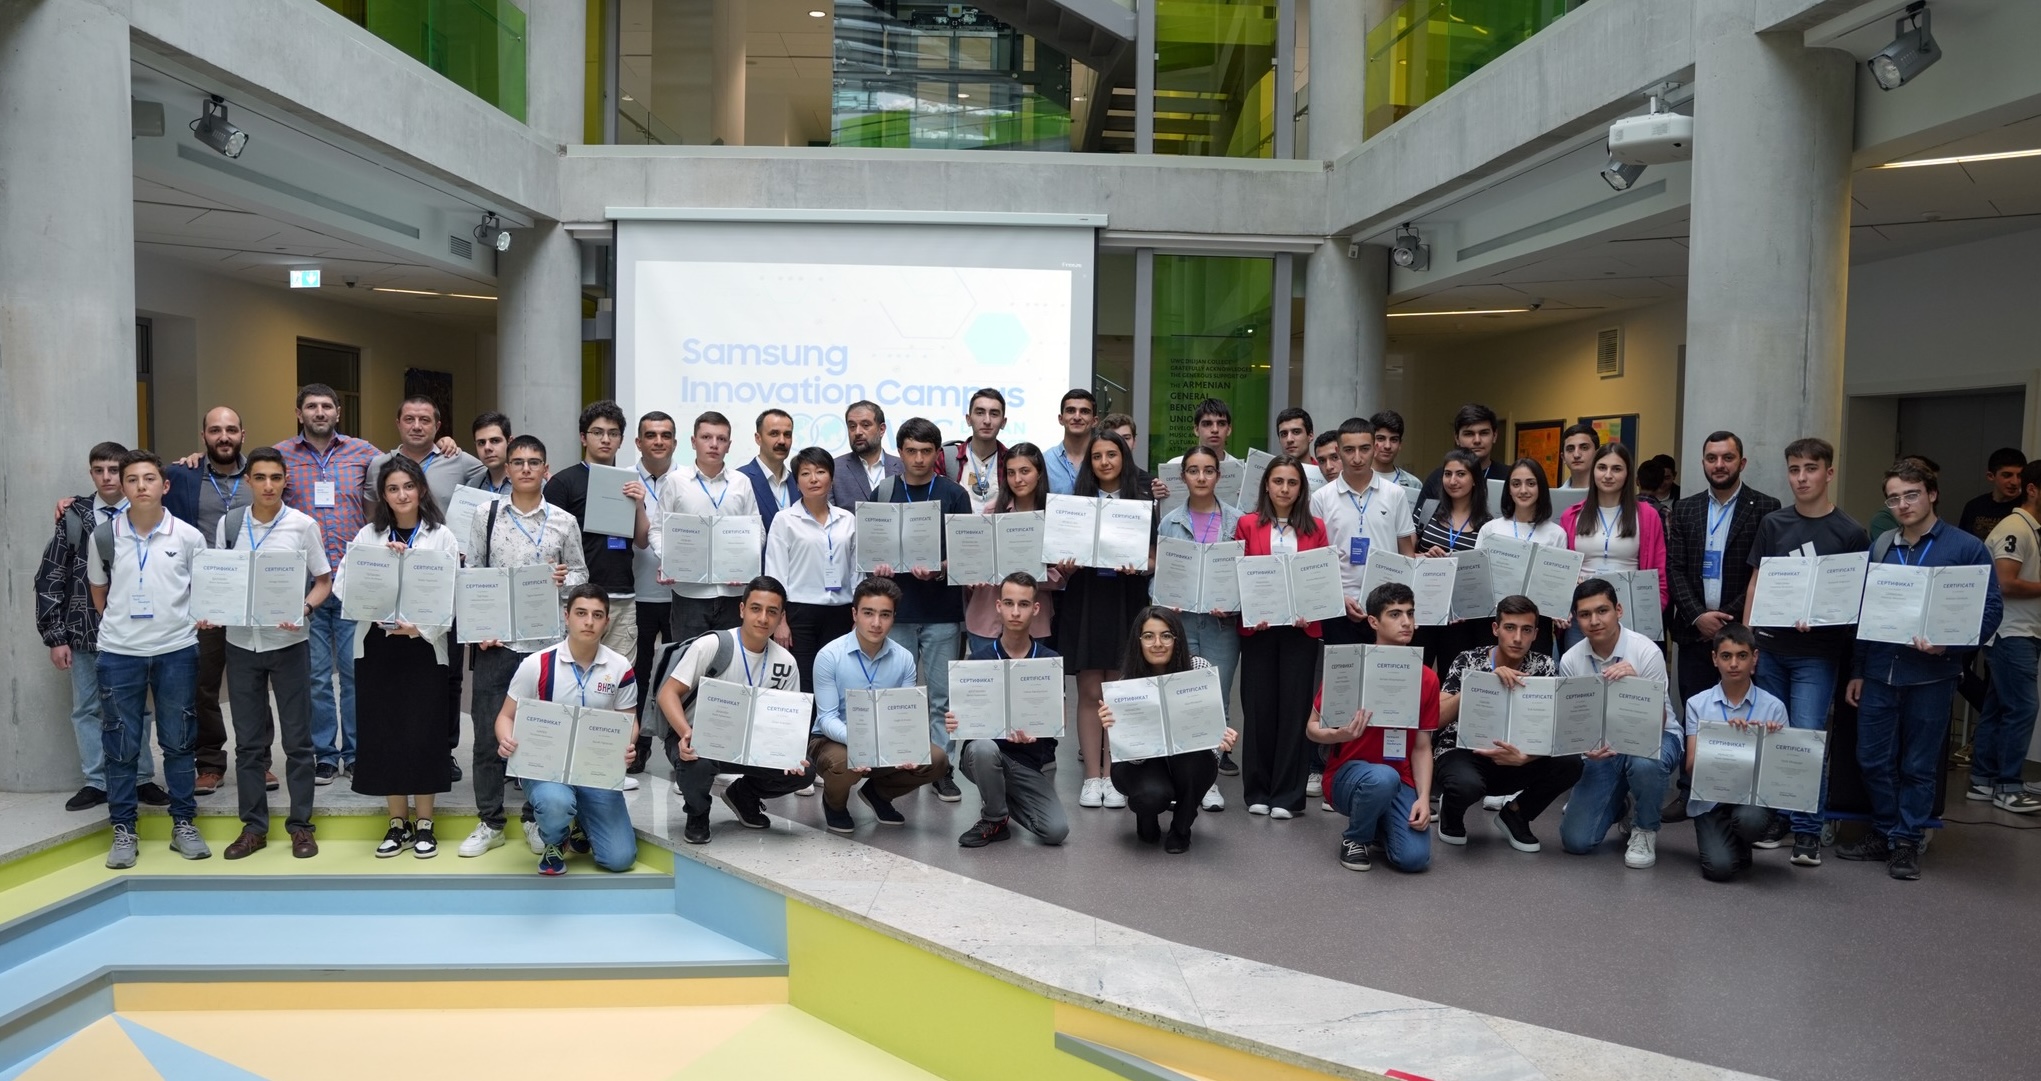 You are currently viewing Samsung Innovation Campus  celebrated the graduation of its second cohort of students on June 10